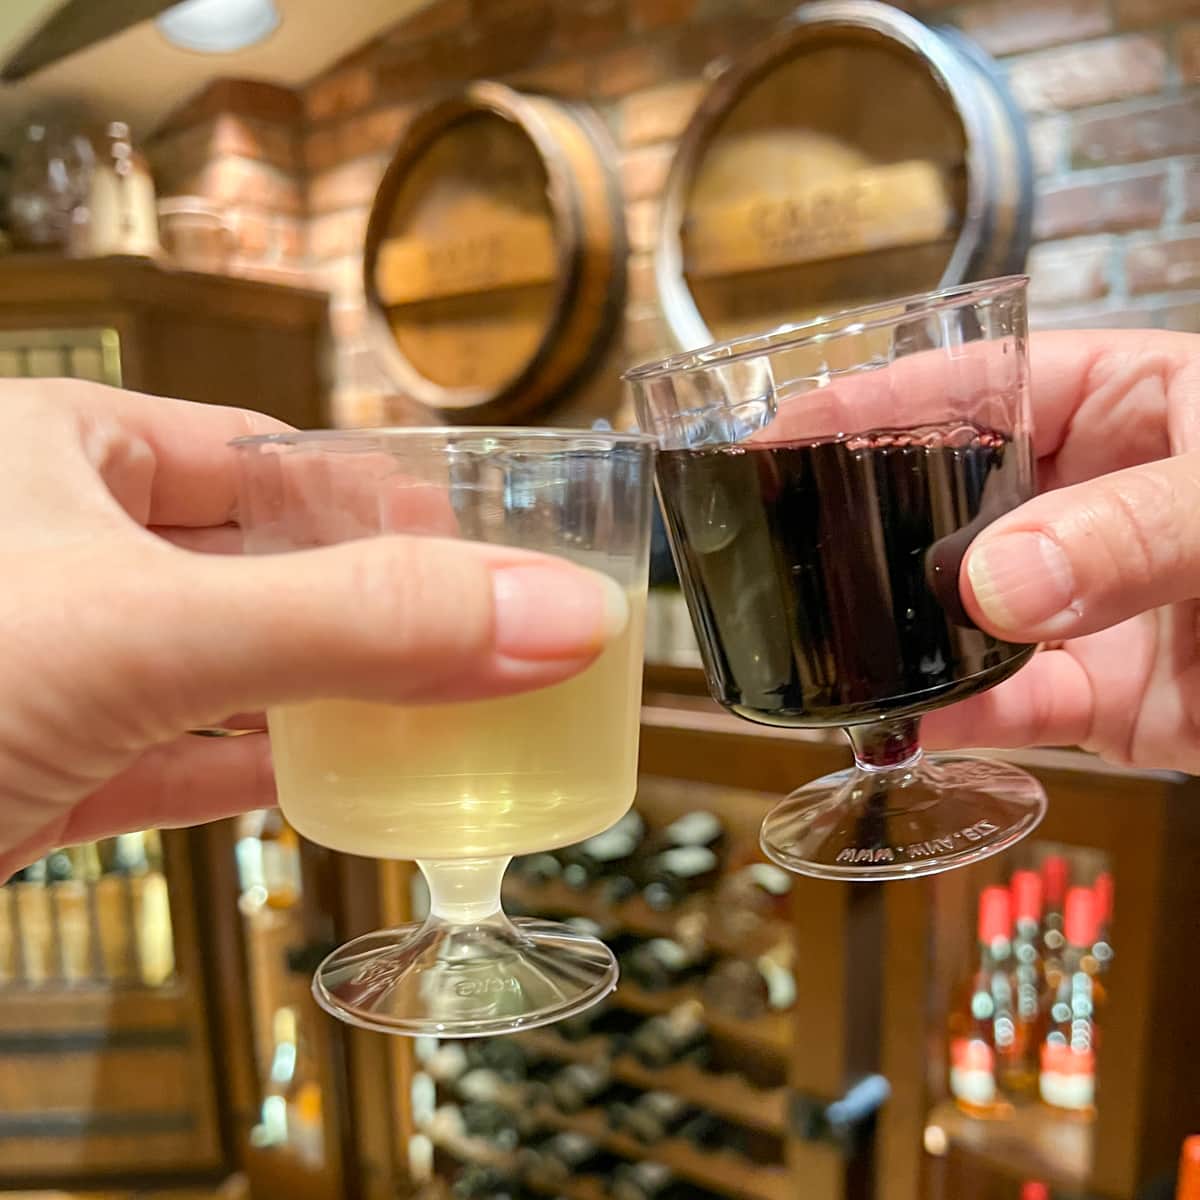 Drinking around the world - Wine in Epcot's France Pavilion